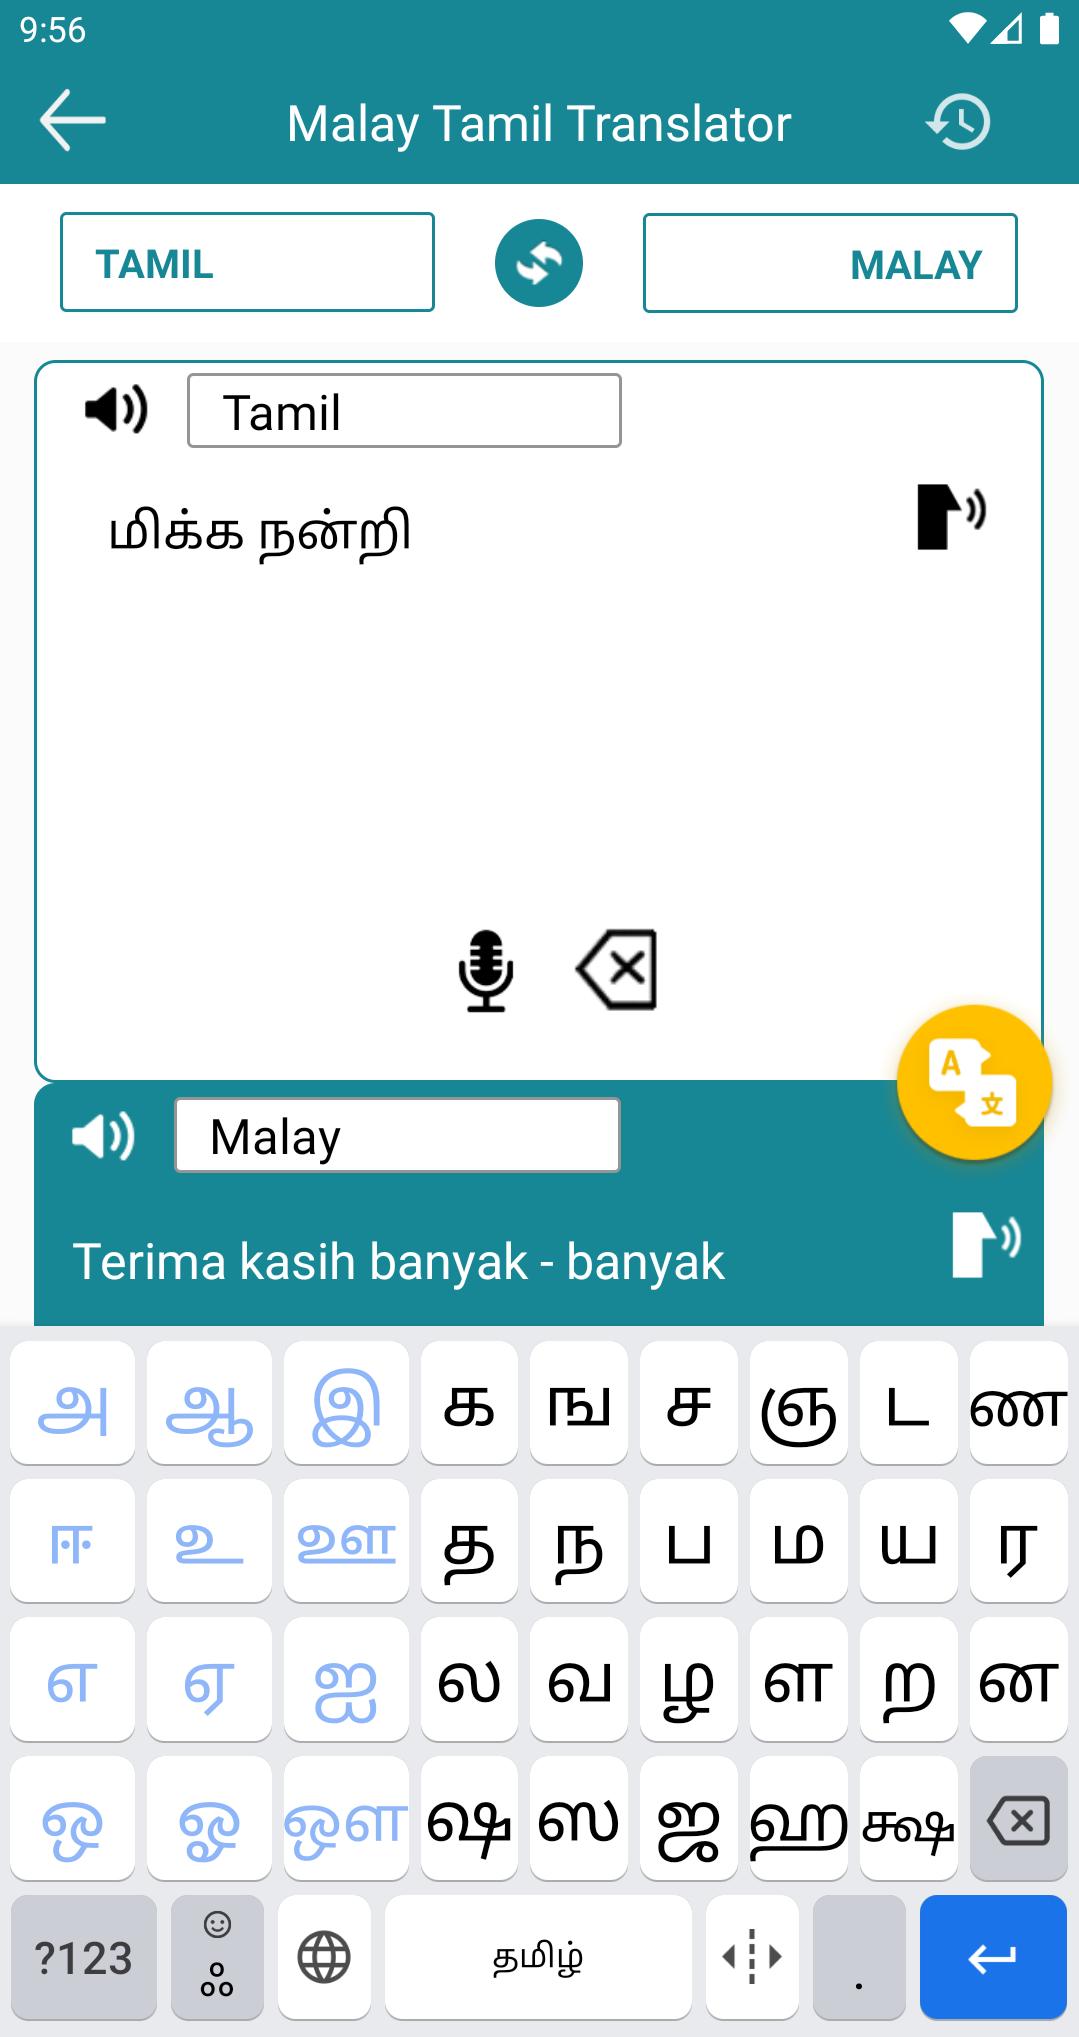 Malay Tamil Translation for Android - APK Download